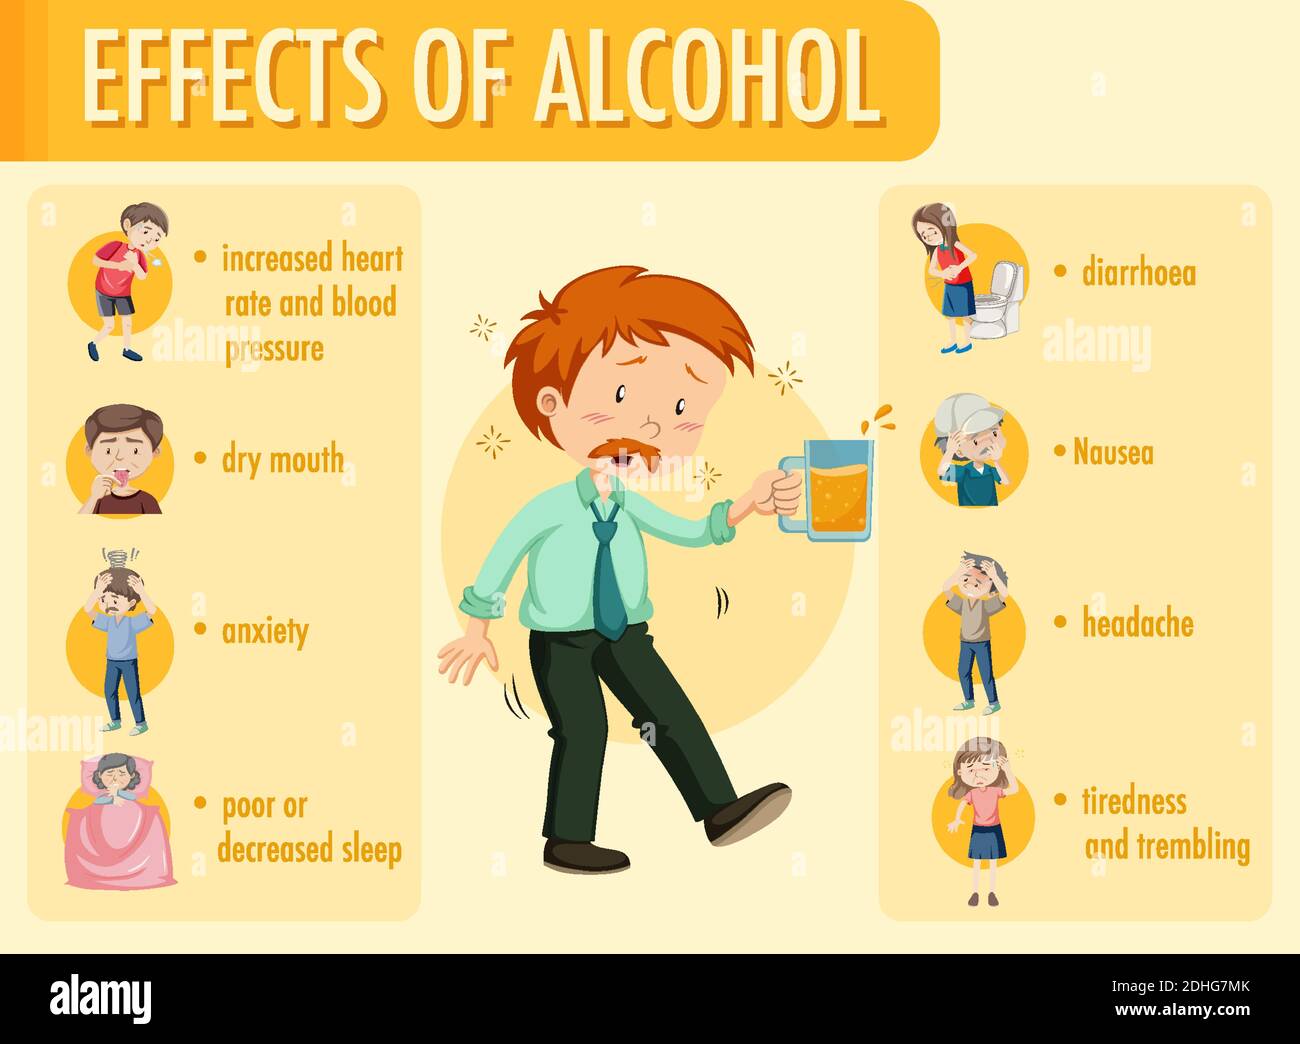 Effects Of Alcohol Information Infographic Illustration Stock Vector Image And Art Alamy 1712